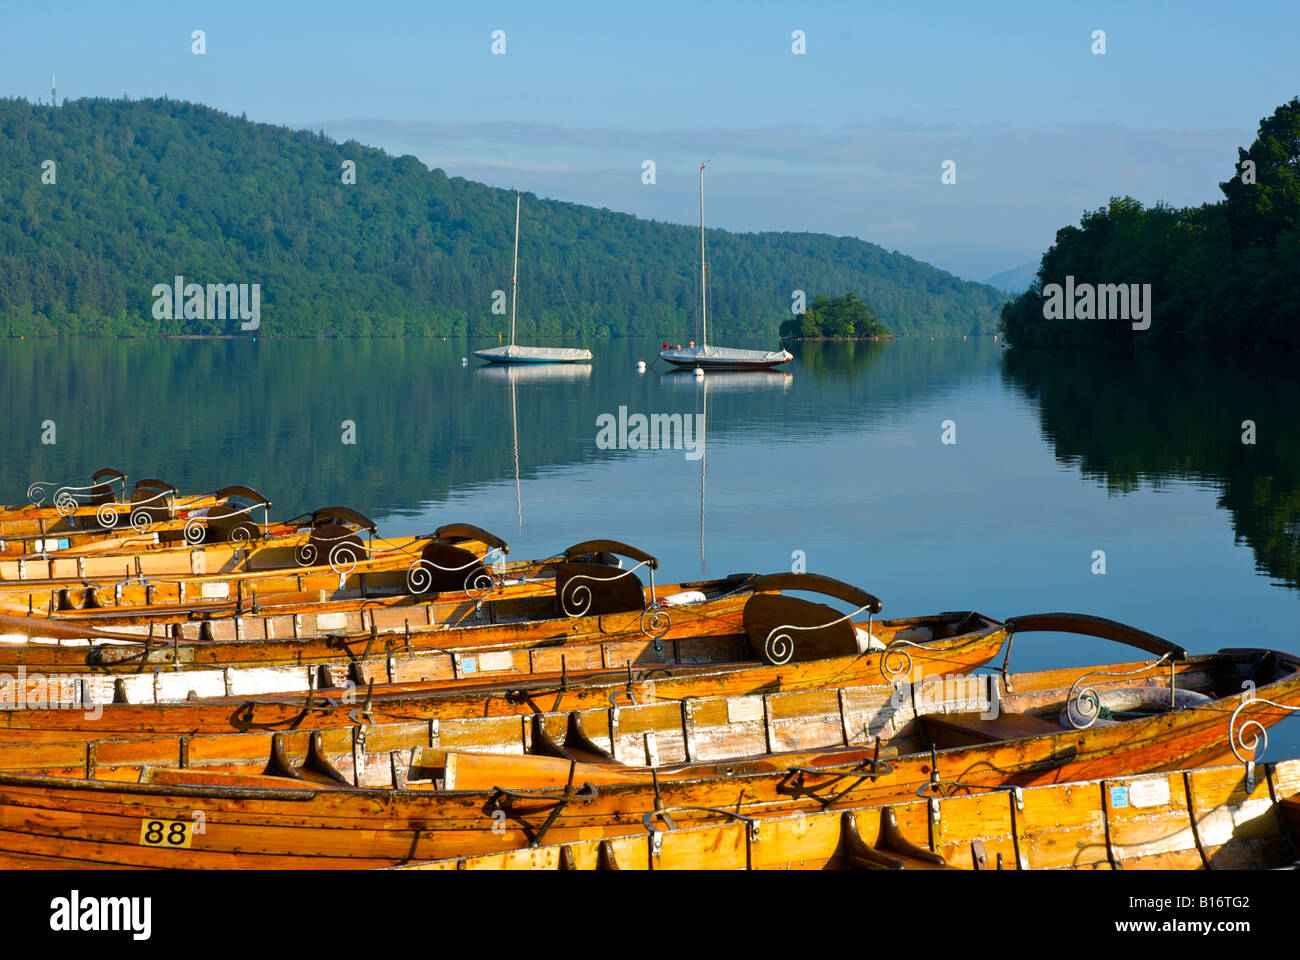 Rowing boats for hire, tied up to pier at Bowness Bay, Lake Windermere, Lake District National Park, Cumbria, England UK Stock Photo